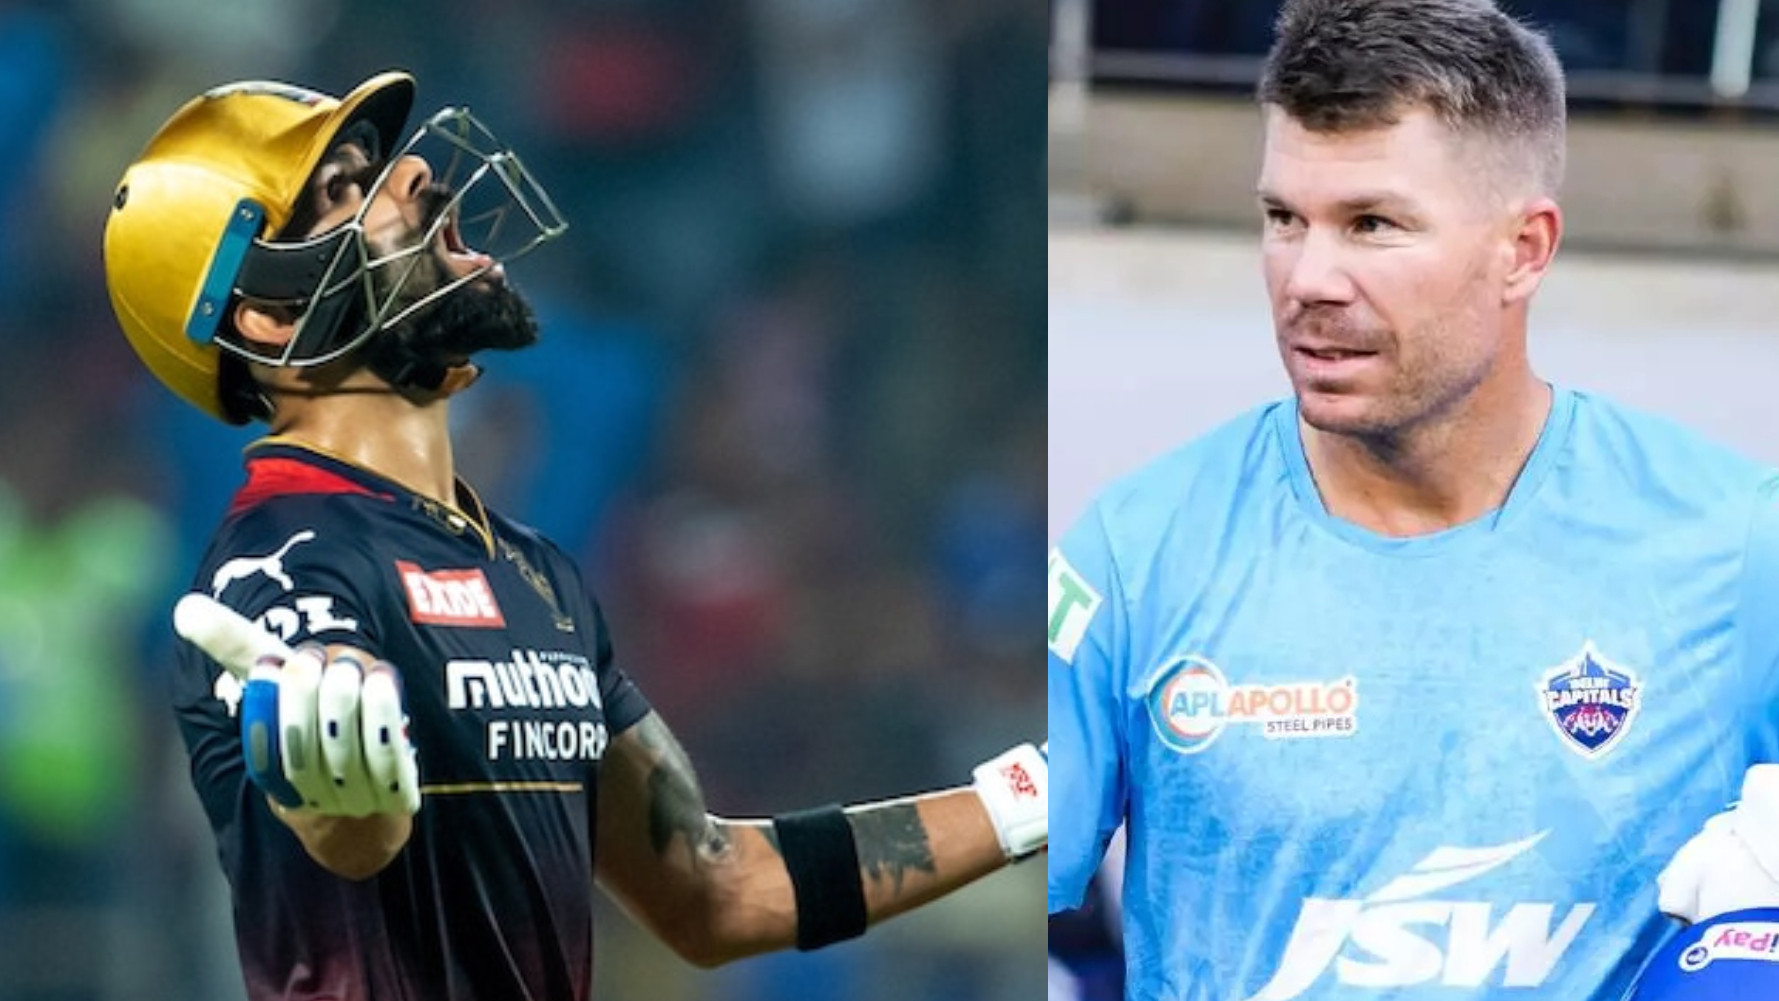 IPL 2022: WATCH - “Have a couple more kids and enjoy love!” - Warner's hilarious advice for struggling Kohli